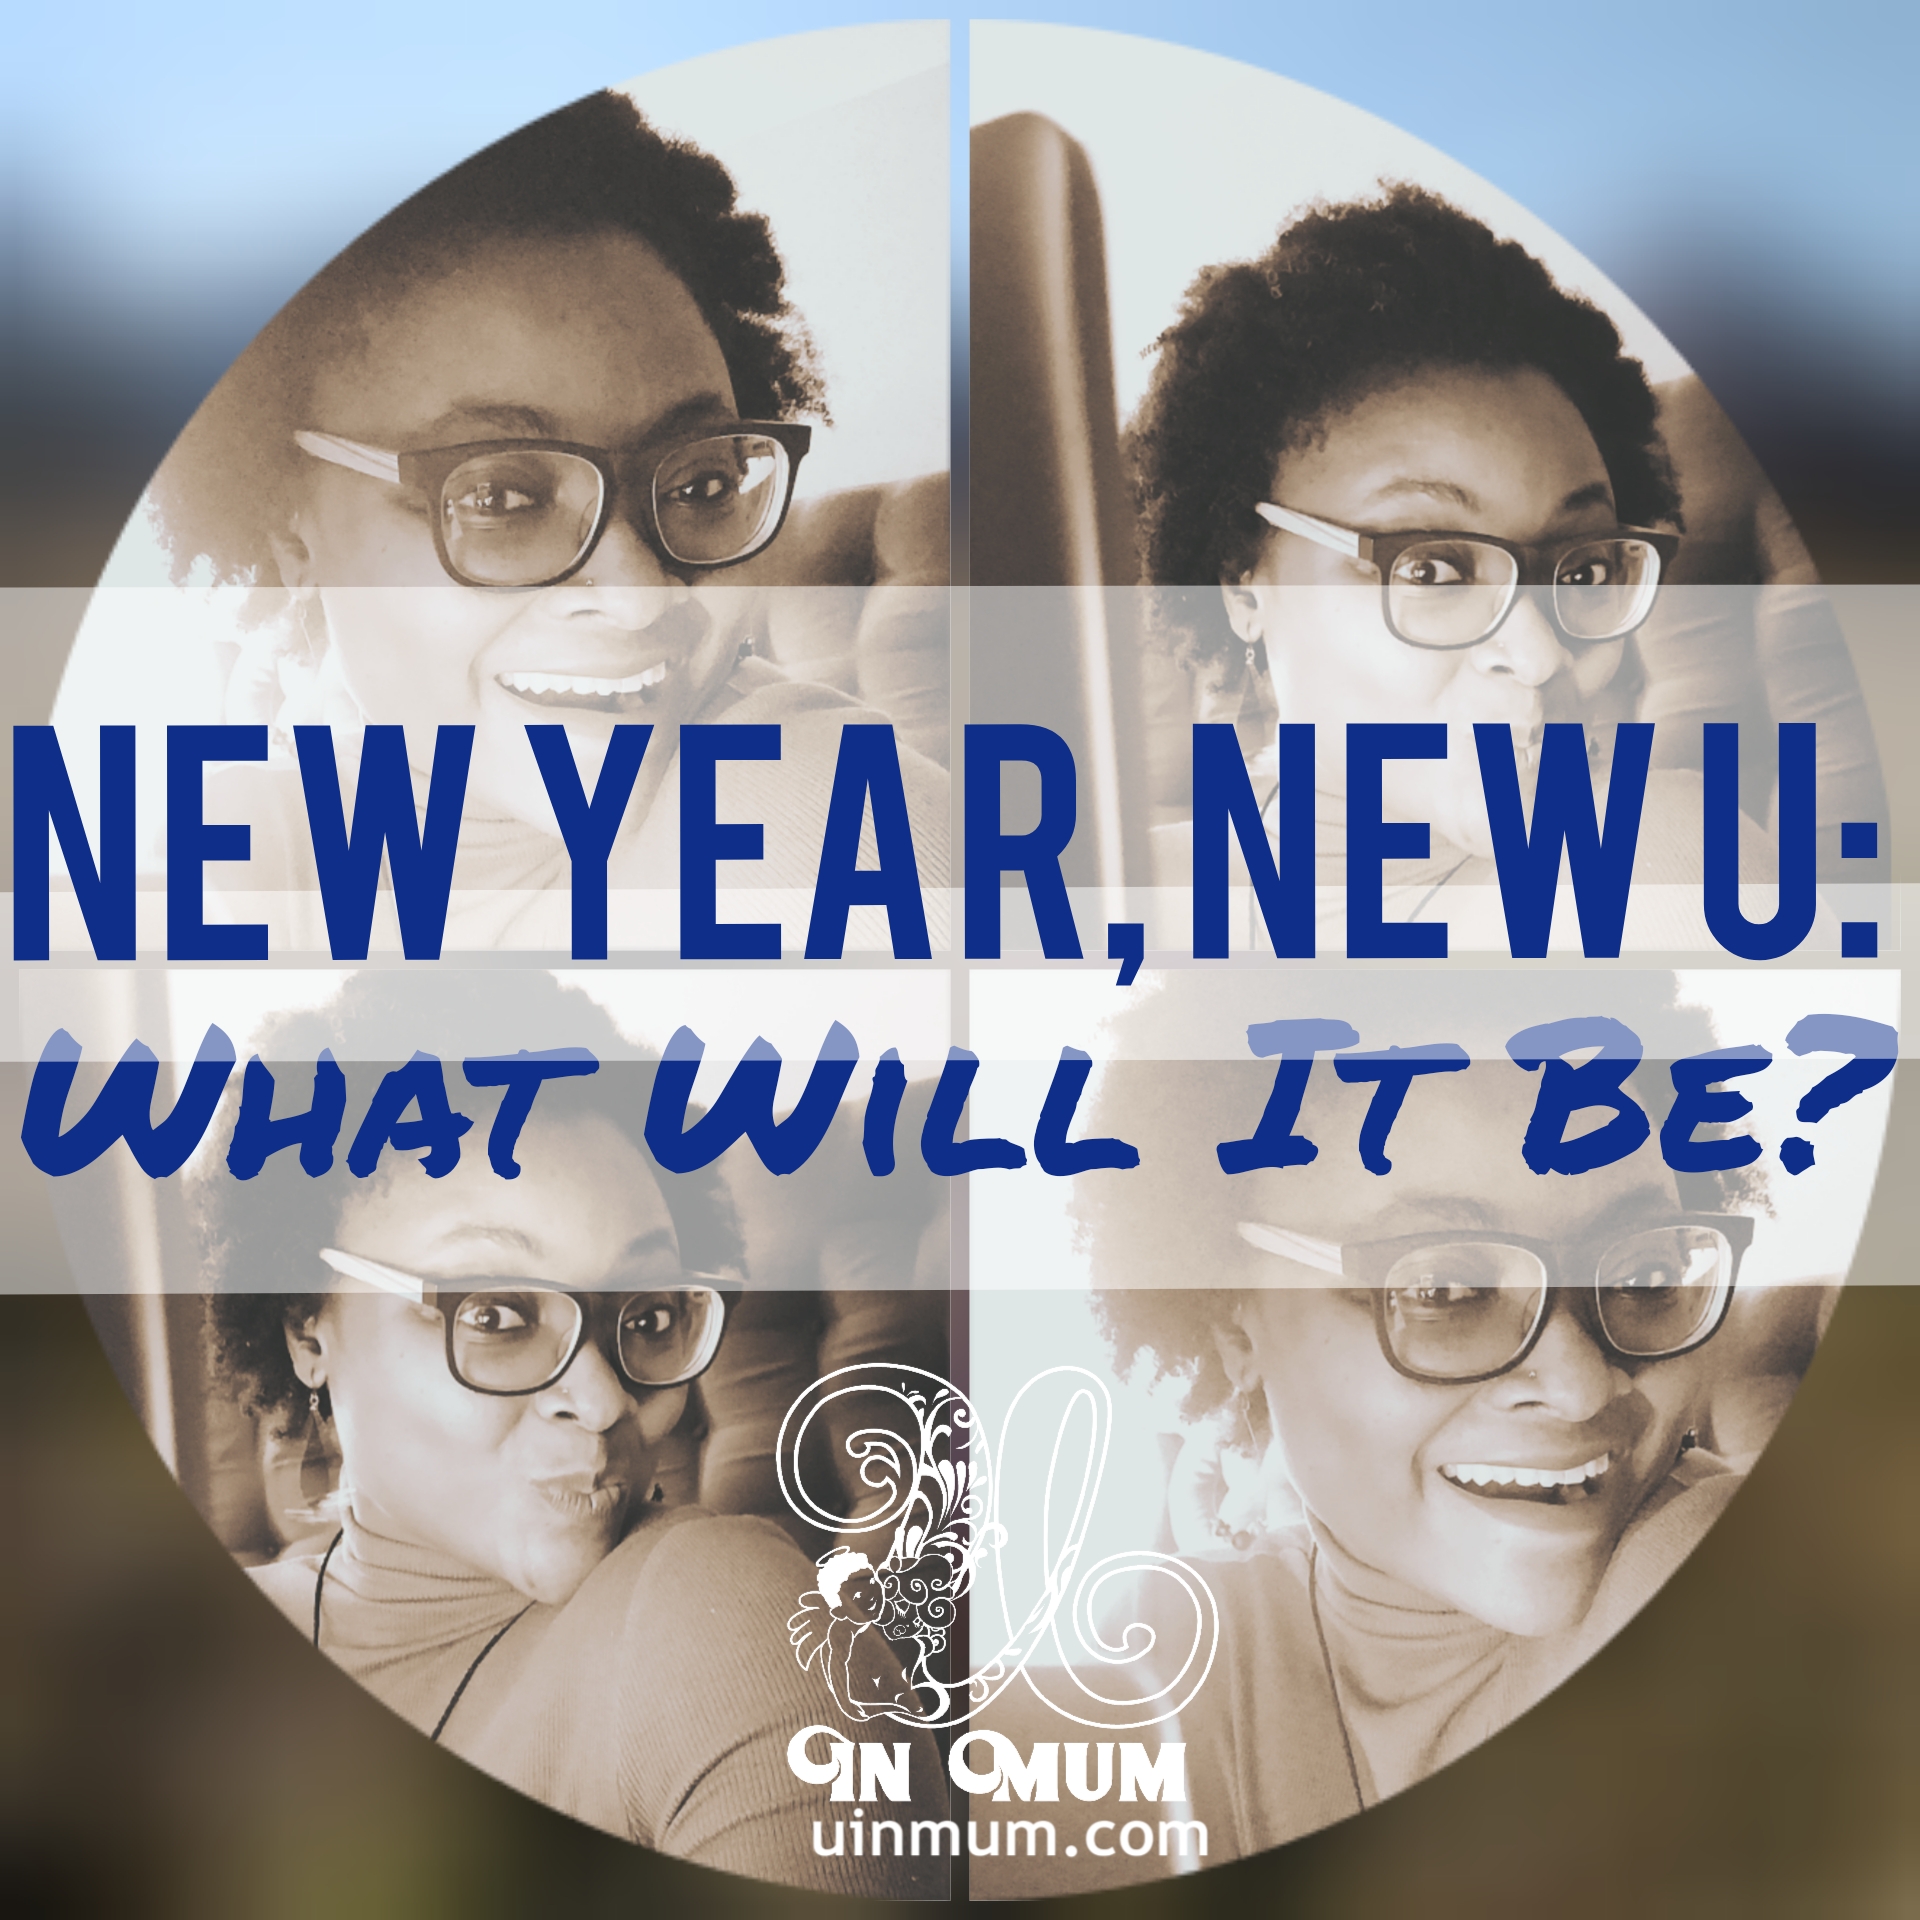 New Year, New U, What Will It Be?